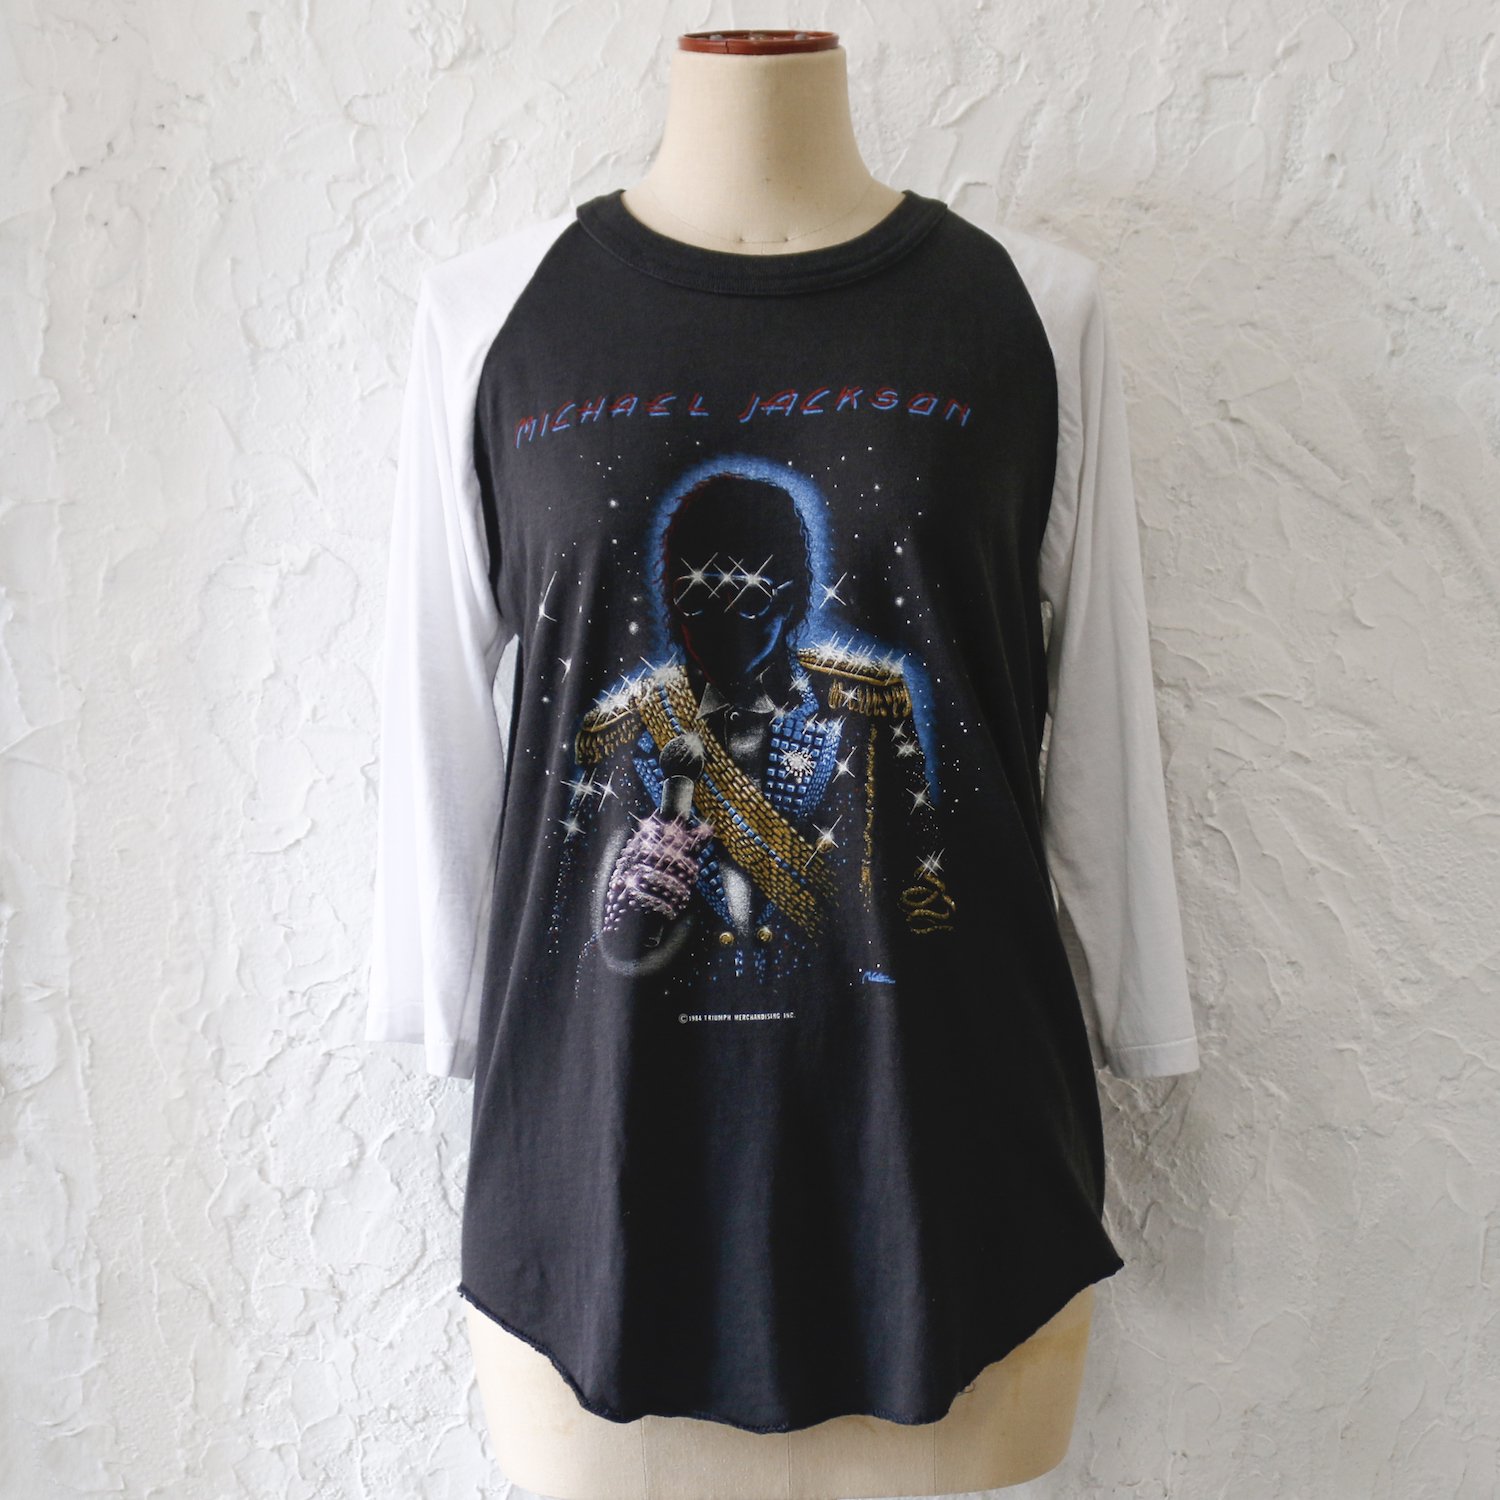 <img class='new_mark_img1' src='https://img.shop-pro.jp/img/new/icons8.gif' style='border:none;display:inline;margin:0px;padding:0px;width:auto;' />Vintage Clothes /1900's Michael Jackson Tee